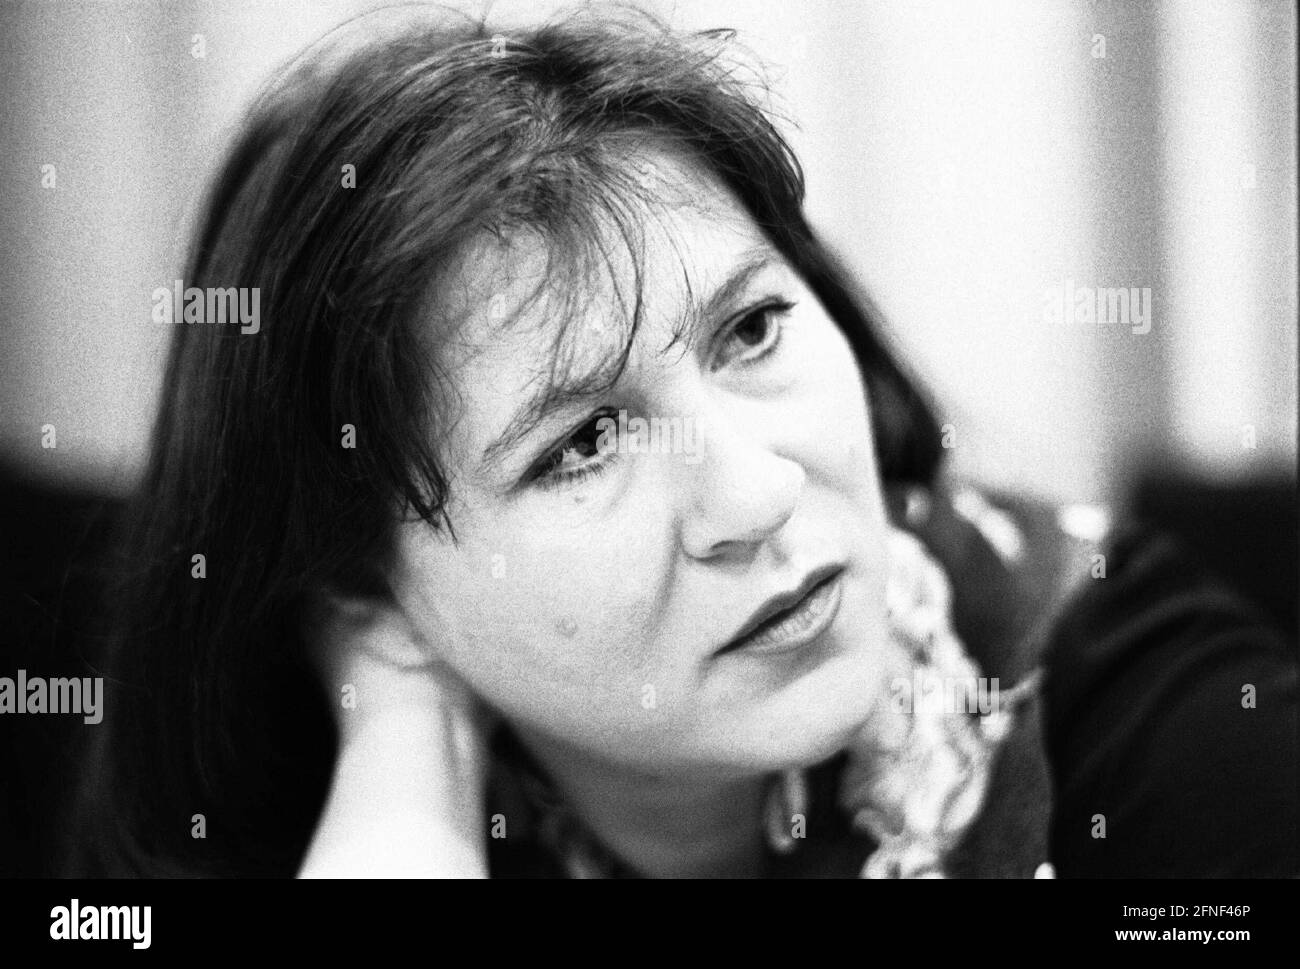 Eva Mattes (born 1954), German actress. The picture was taken during a reading at the Harenberg City Center, Dortmund. [automated translation] Stock Photo